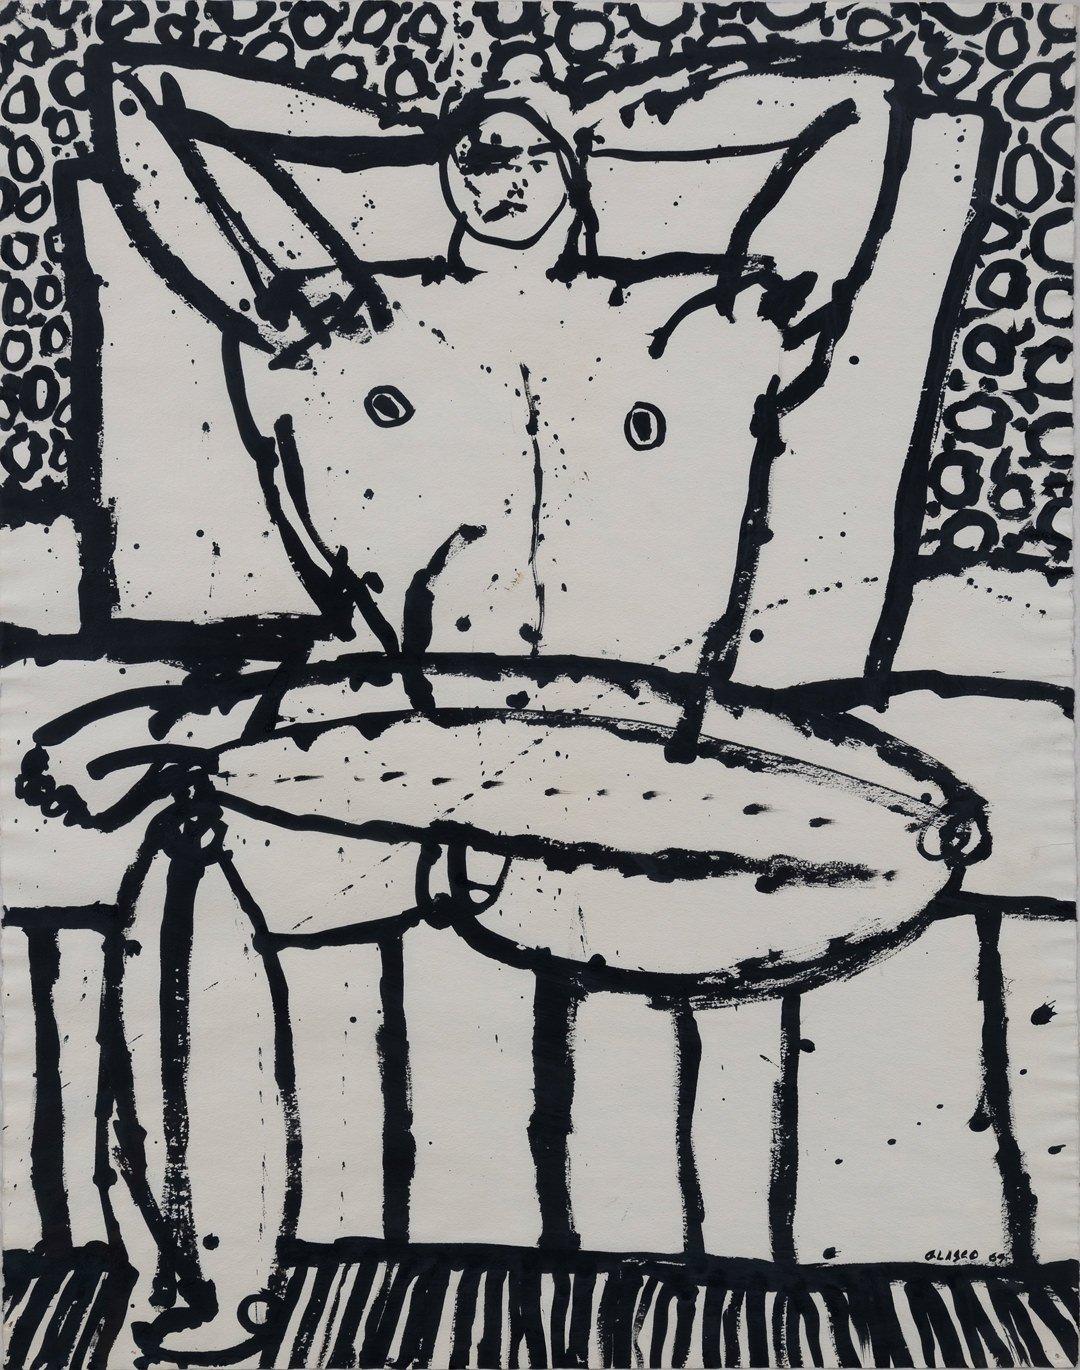 Joseph Glasco Figurative Painting - Seated Male, Mid-Century Male Nude Figurative Expressionist Drawing on Paper